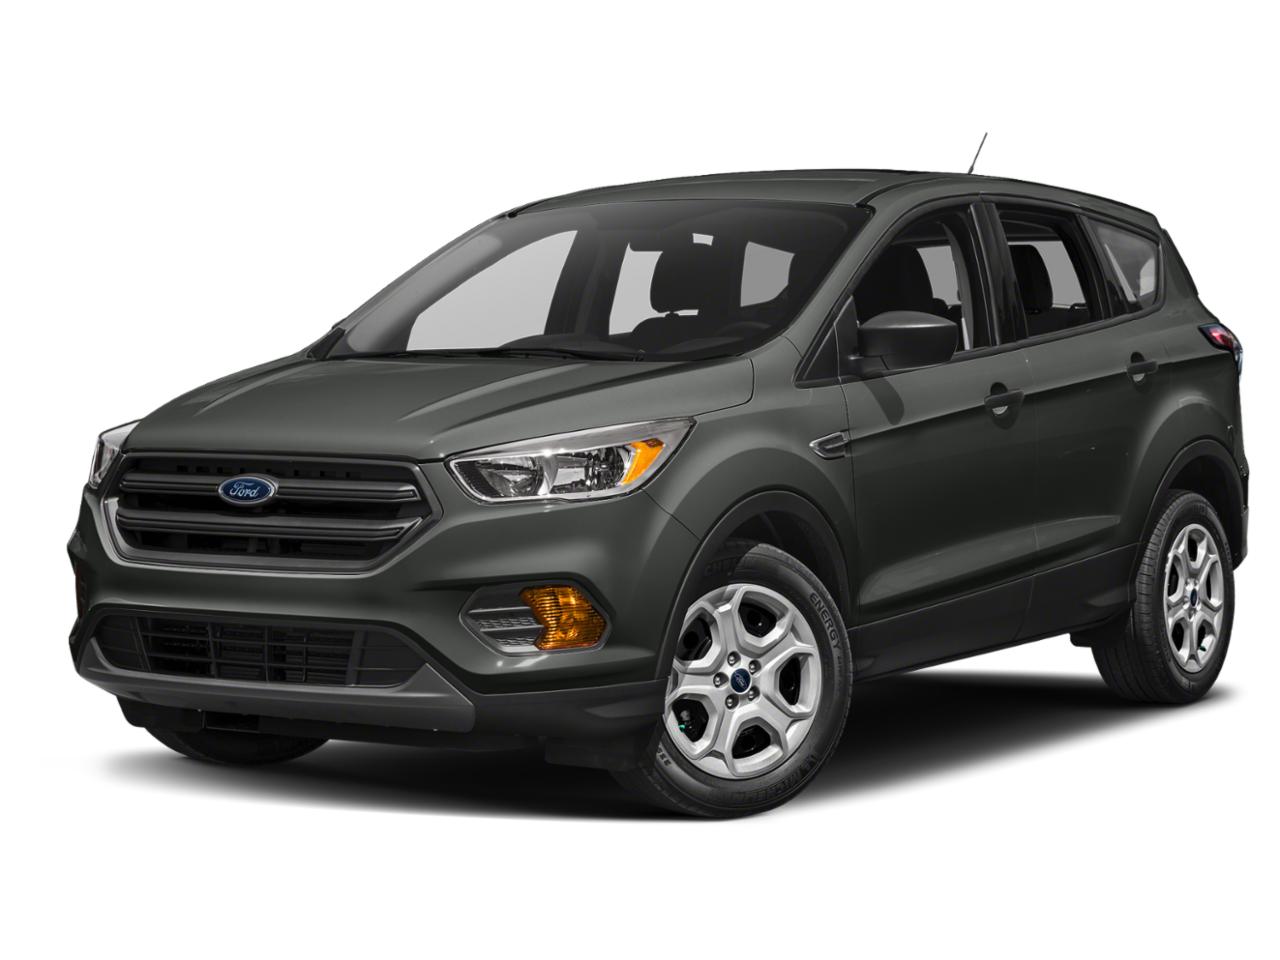 2018 Ford Escape Vehicle Photo in Saint Charles, IL 60174